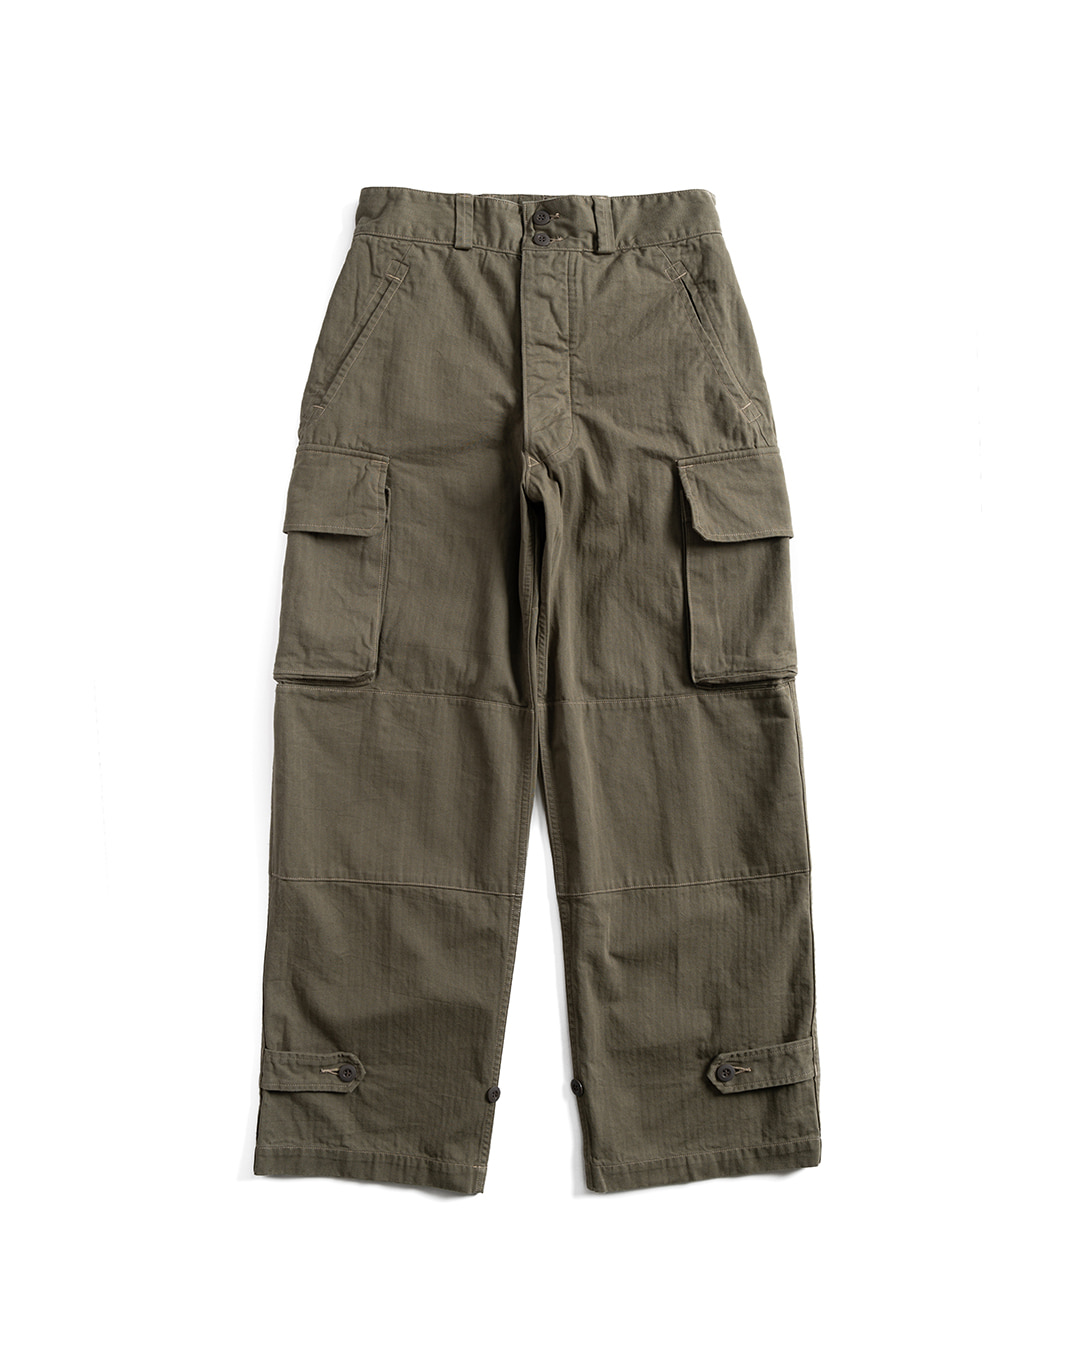 M-47 FRENCH ARMY CARGO PANTS (army green)